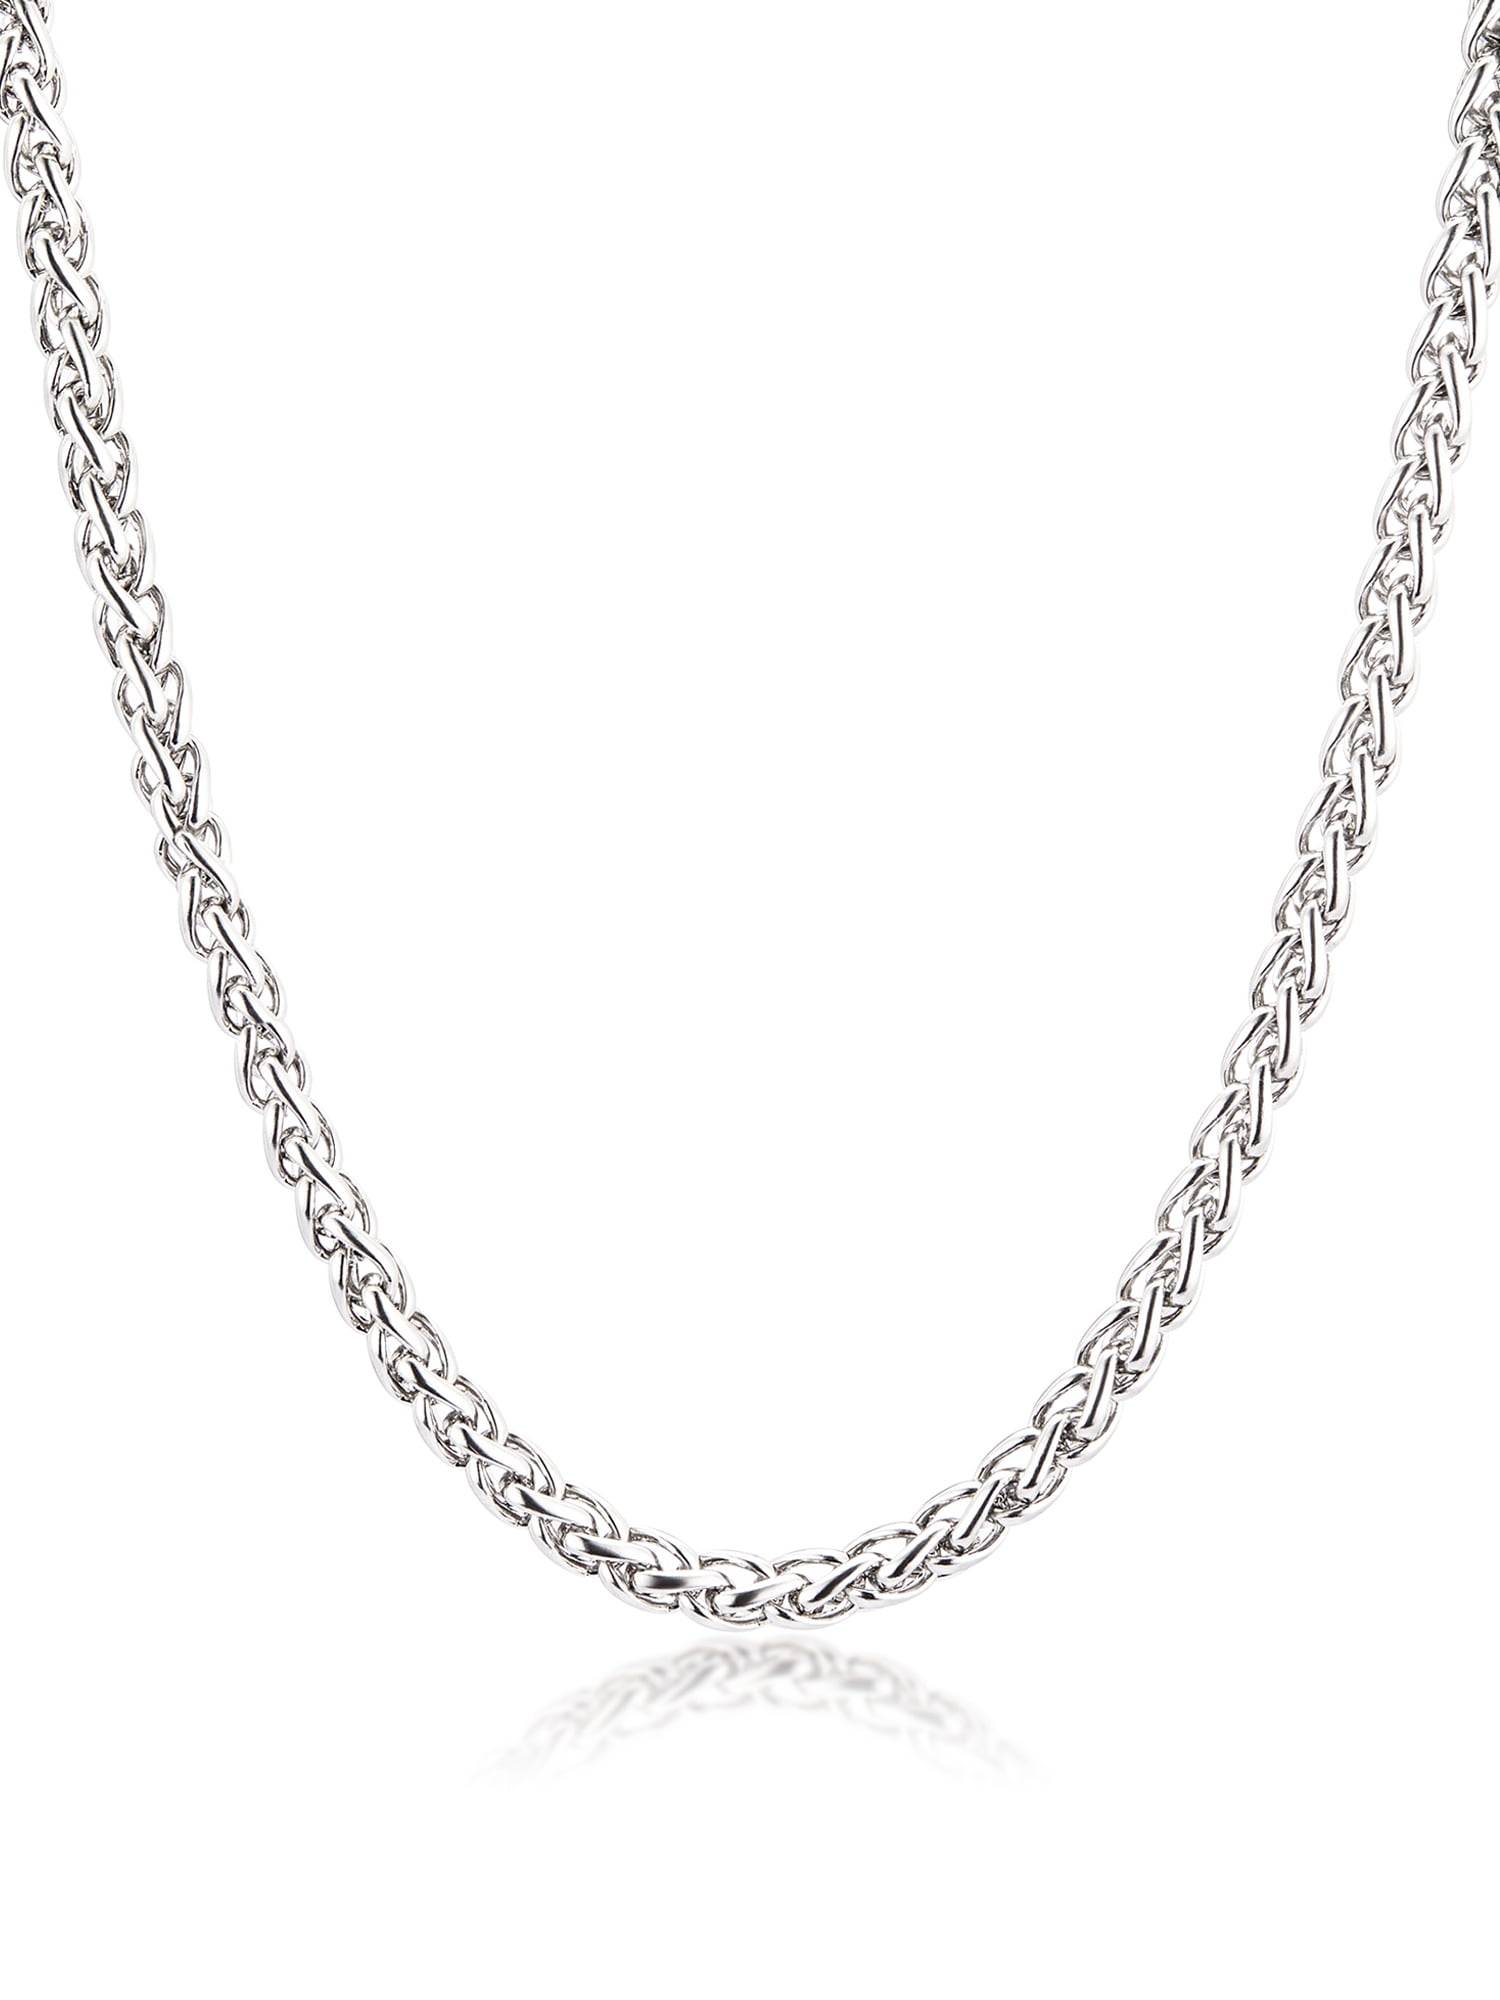 Pick 3-6mm Silver Stainless Steel Wheat Braided 20" Chain Links Necklace Gift 